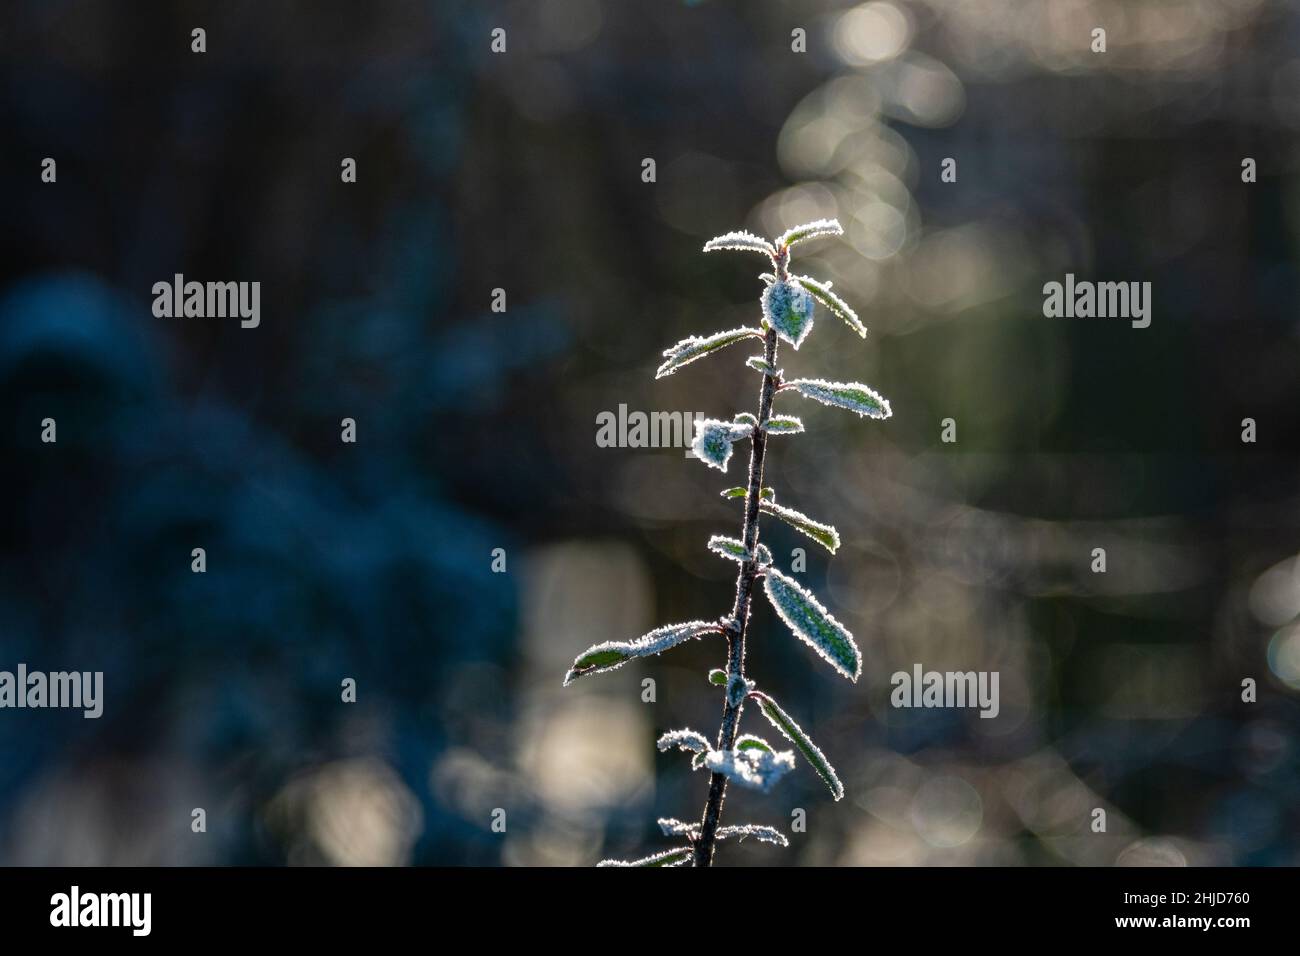 Leafs and plants covered by white frost Stock Photo